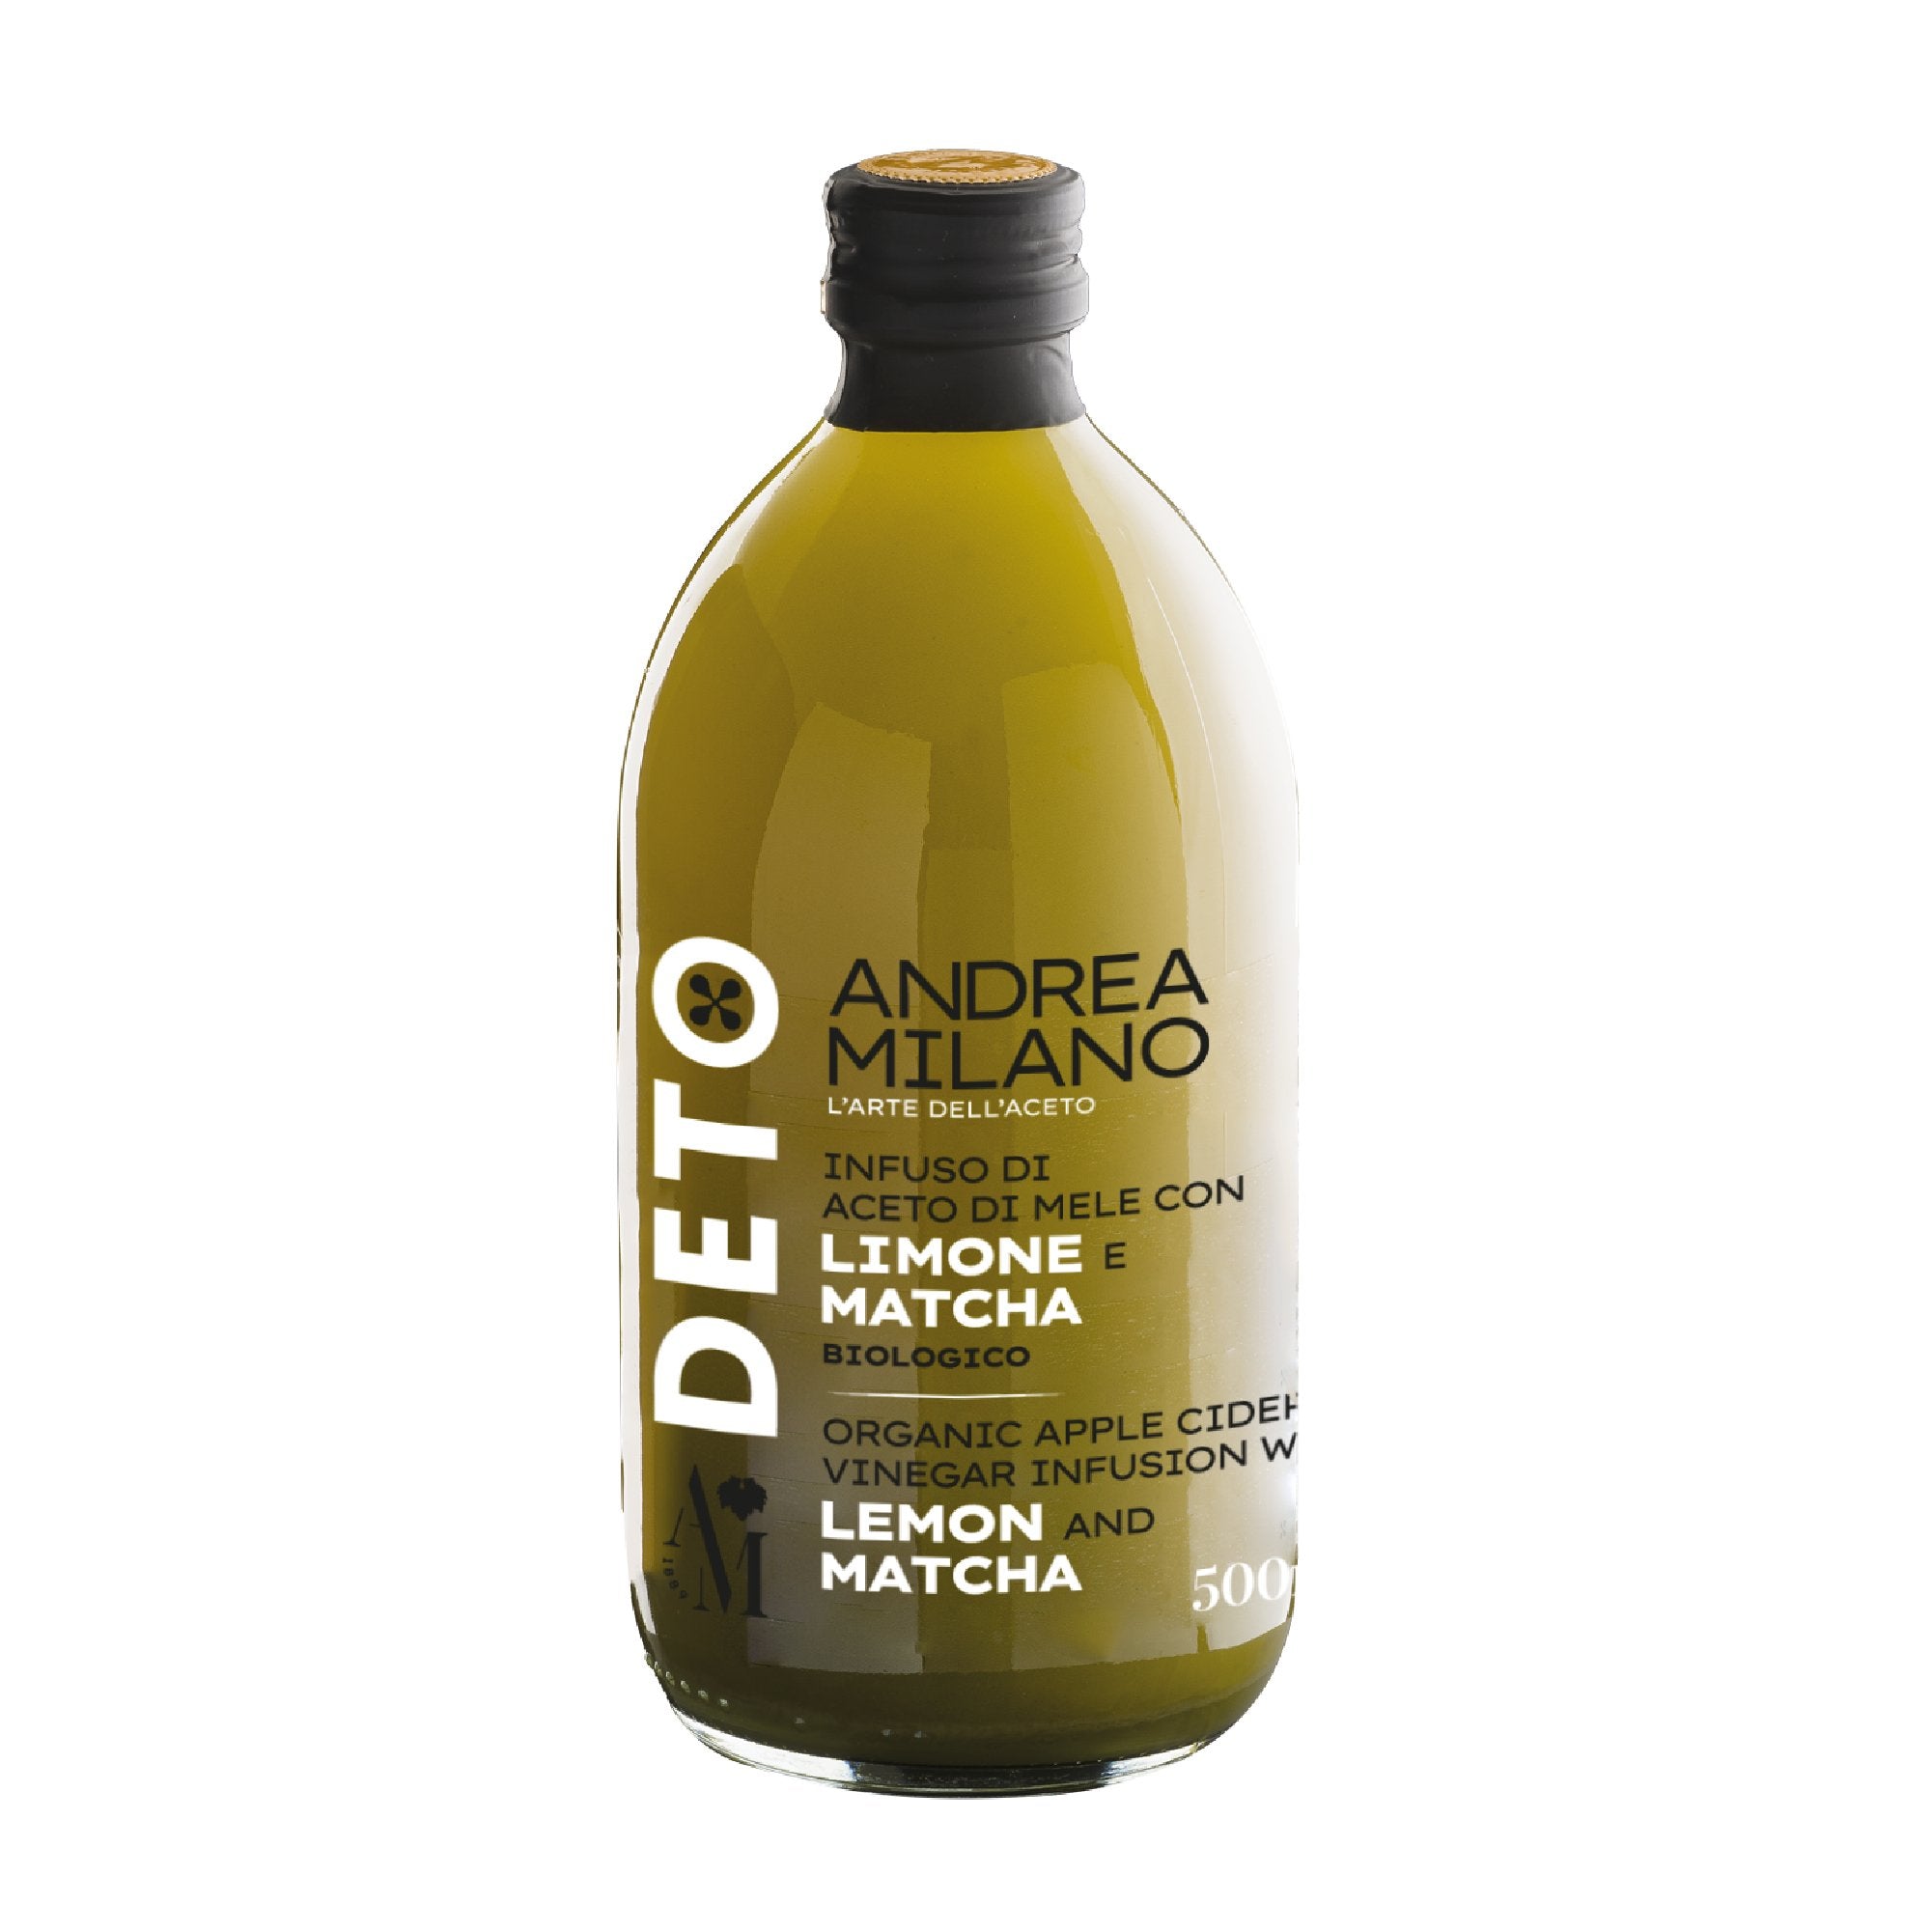 Bottle of Deto organic apple cider vinegar with lemon and matcha by Andrea Milano.